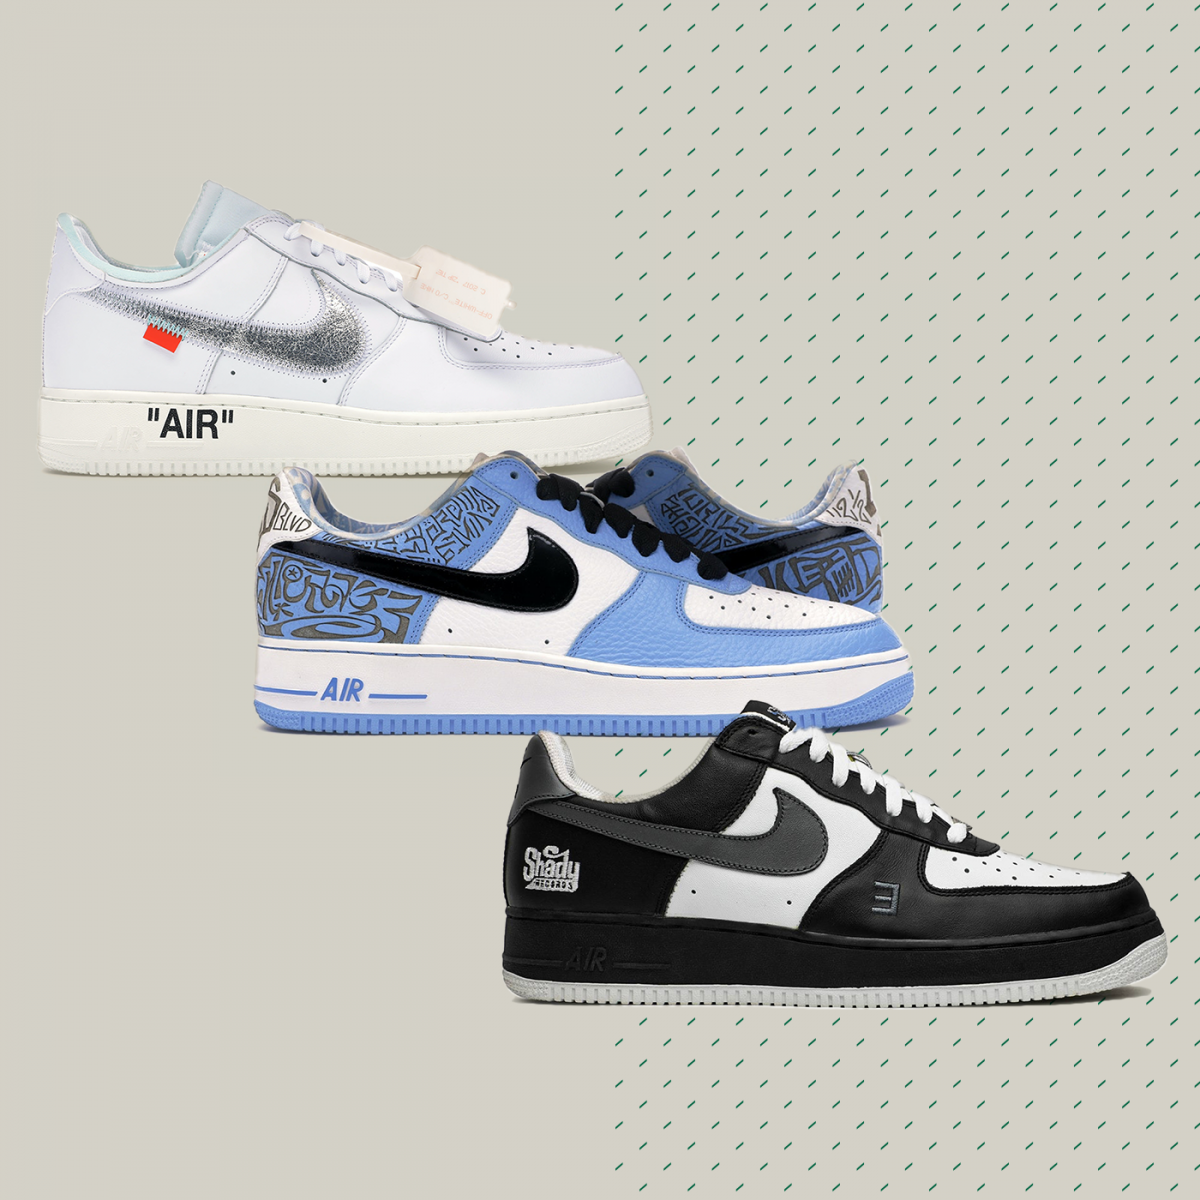 desierto laberinto lanzar Nike Air Force 1: The Buyer's Guide - StockX News